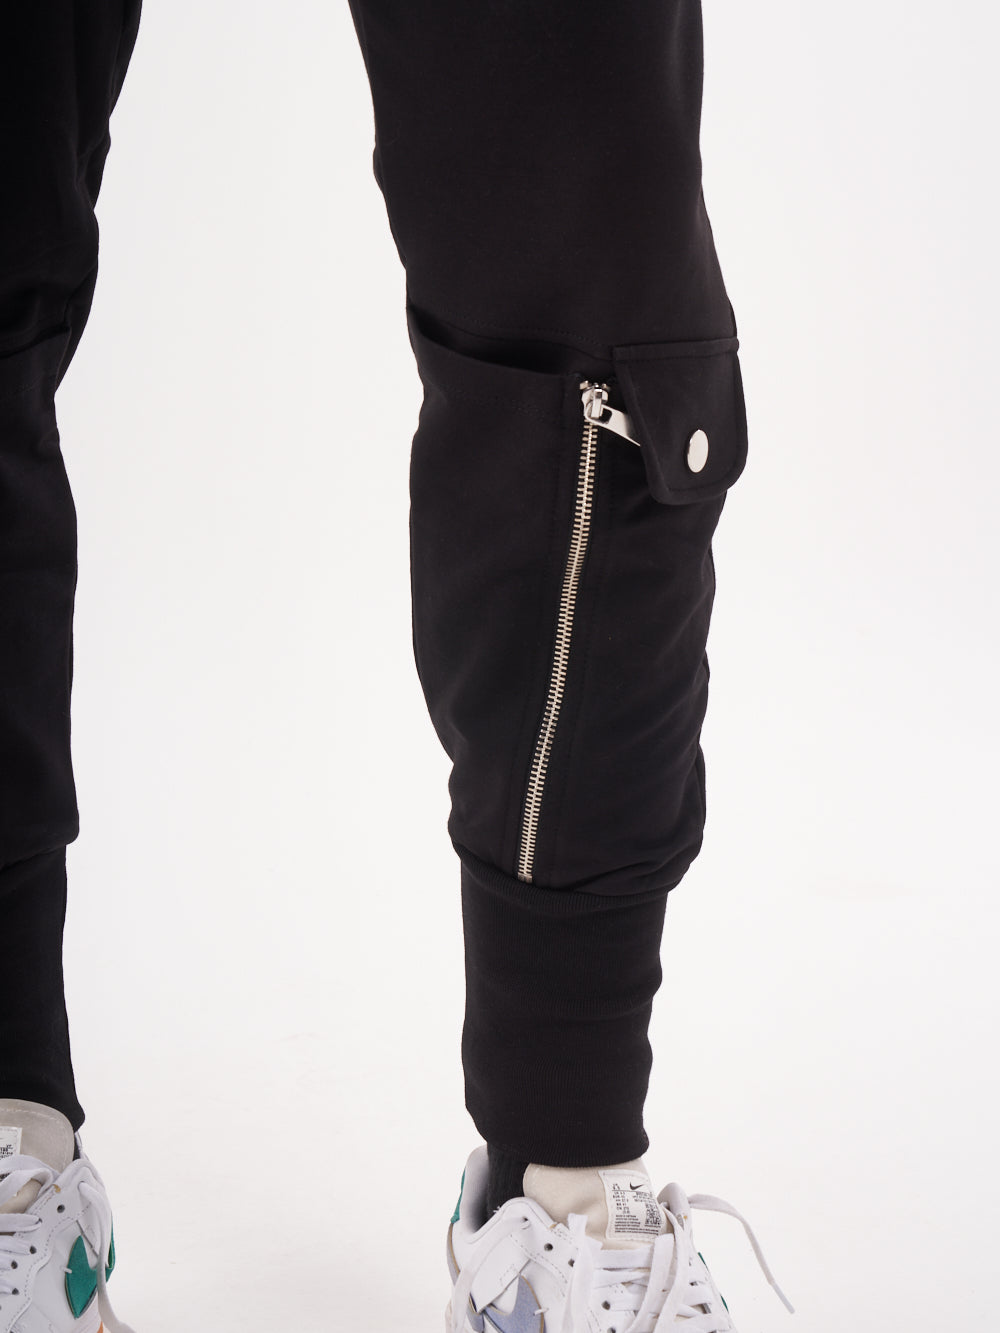 A pair of GUERRILLA | BLACK joggers with zippers on the side.